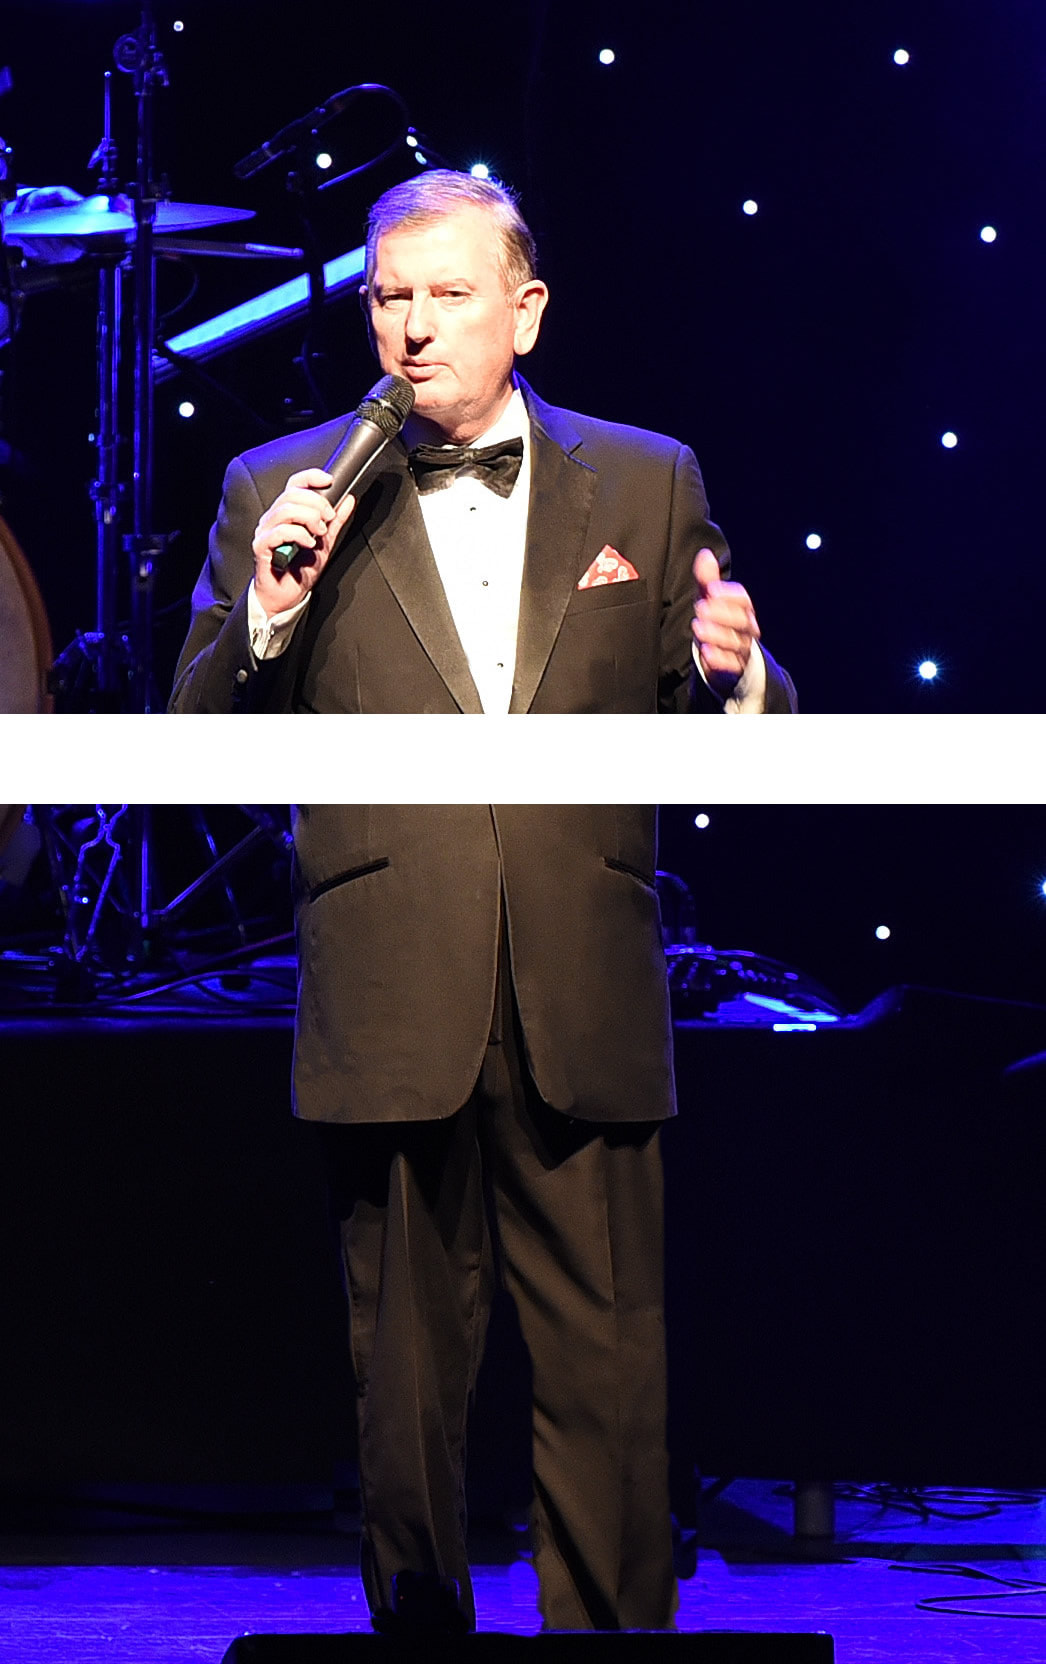 Martin Joseph is the best Frank Sinatra Tribute Show in Europe